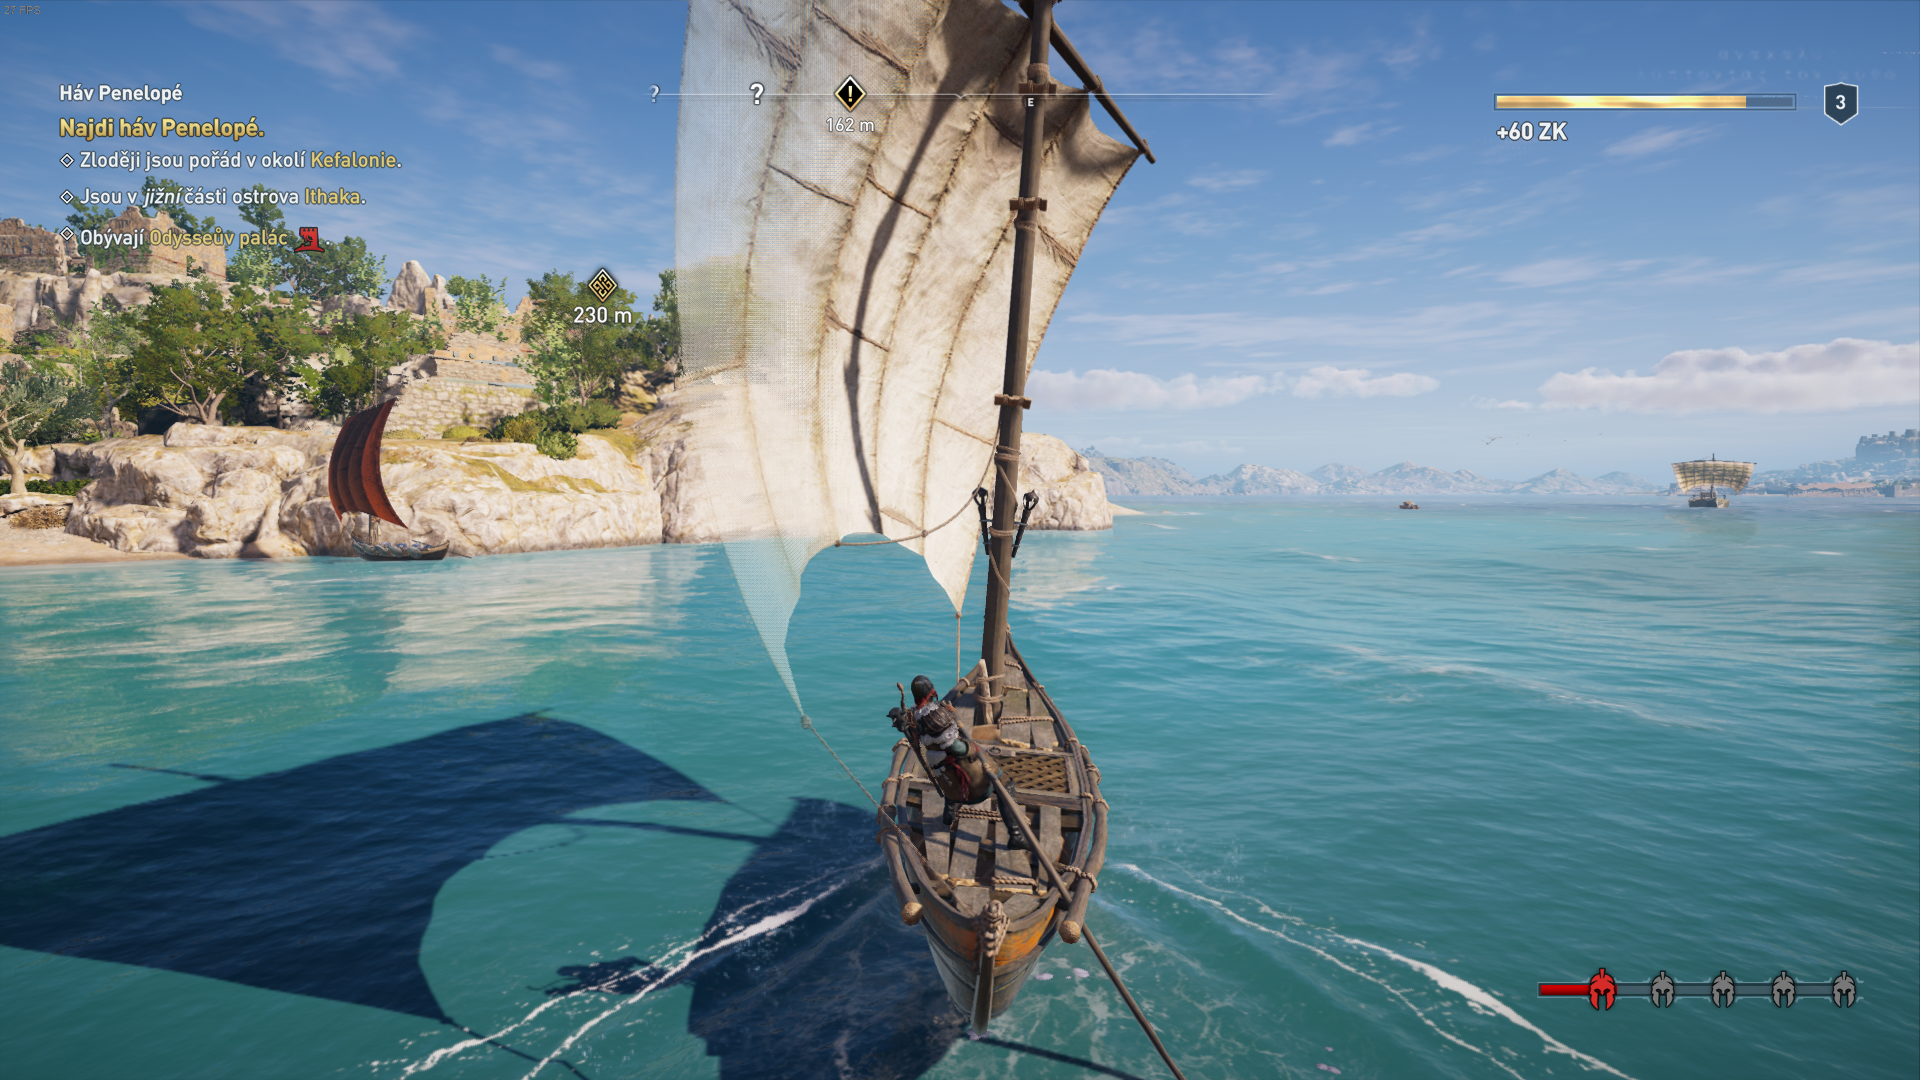 assassin's creed odyssey ps4, assassin's creed odyssey xbox one,assassin's creed odyssey torrent, assassin creed odyssey pc